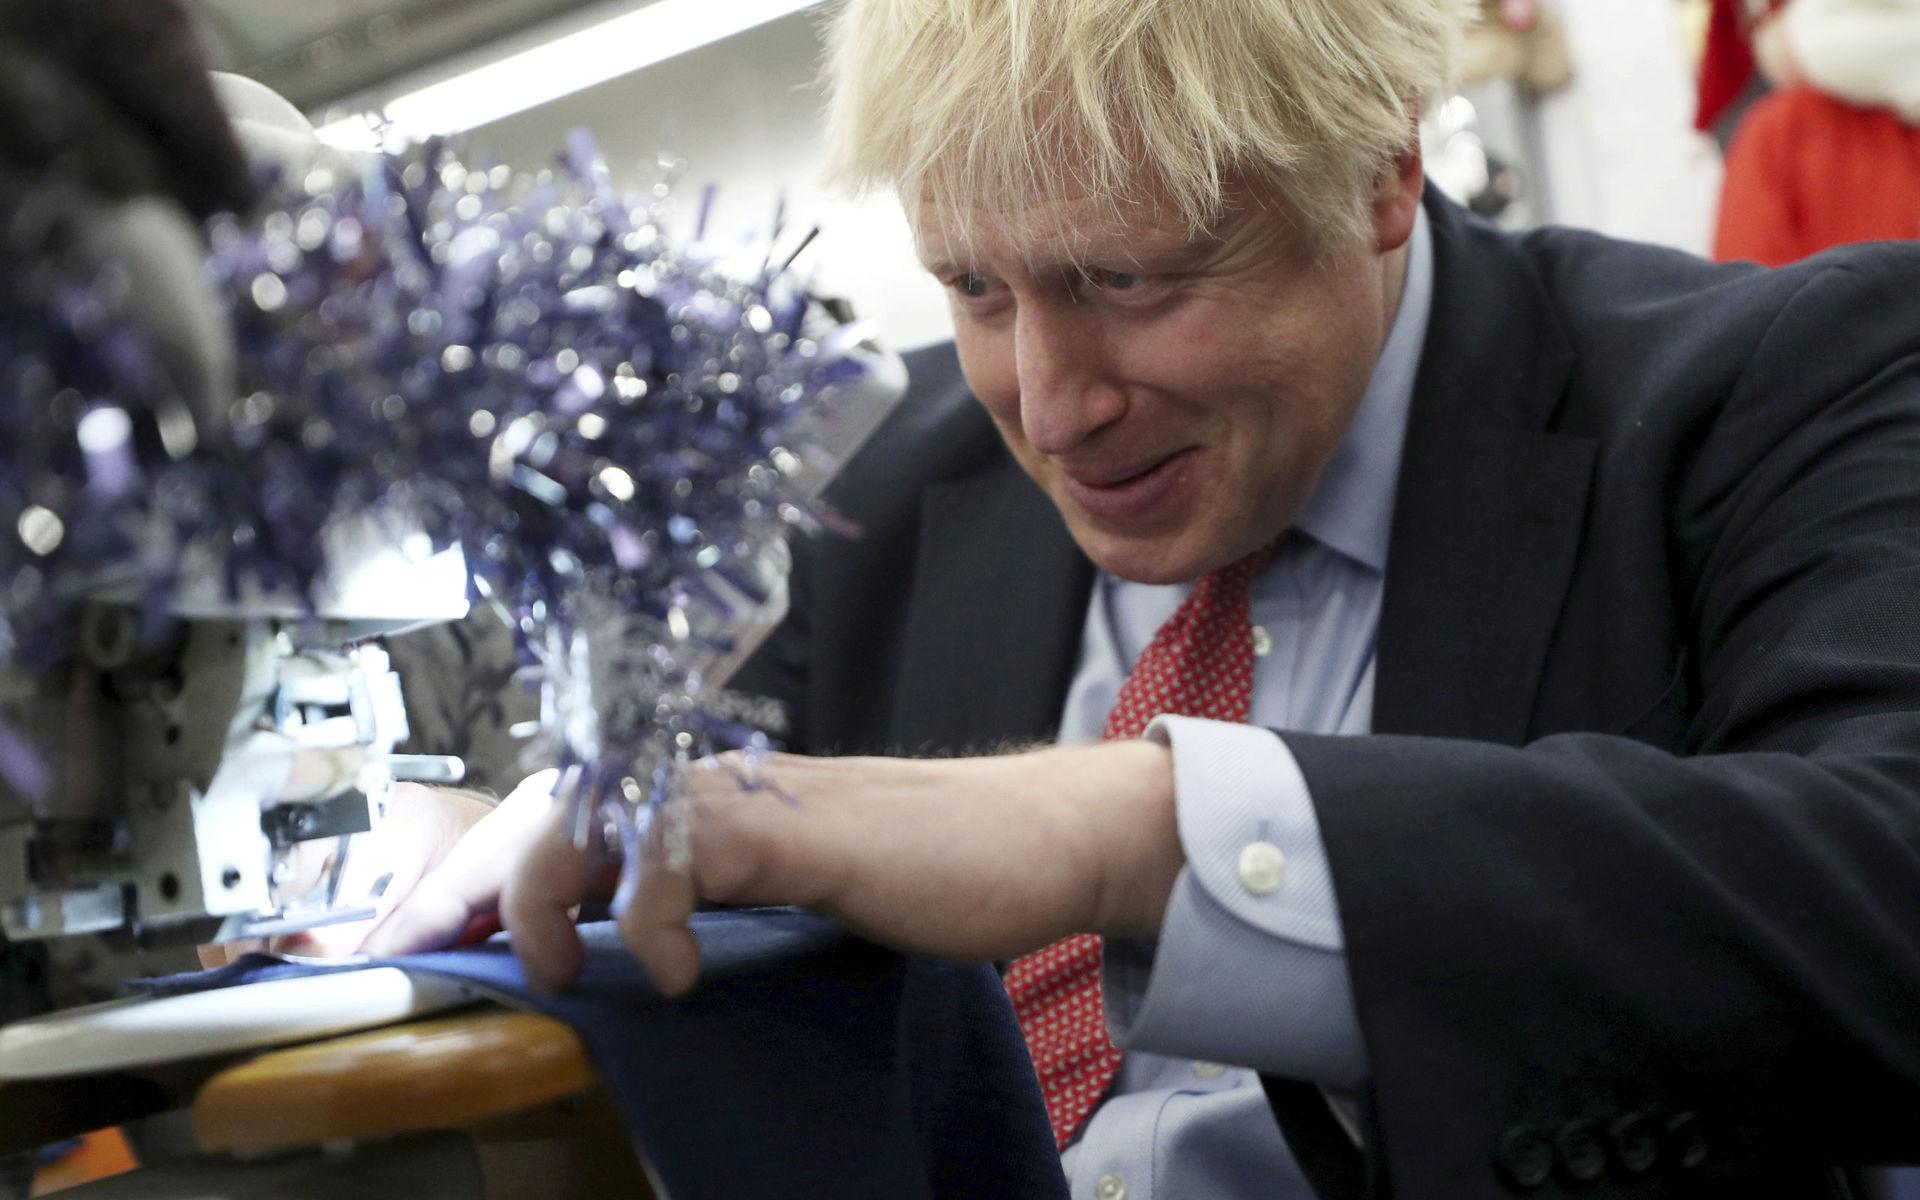 Britain&apos;s Prime Minister Boris Johnson tries to operate a sewing machine decorated for Christmas, during an election campaign stop at John Smedley Mill in Matlock, England, Thursday Dec. 5, 2019. The UK goes to the polls in a General Election on Dec. 12. (Hannah McKay/Pool via AP)  LRC105